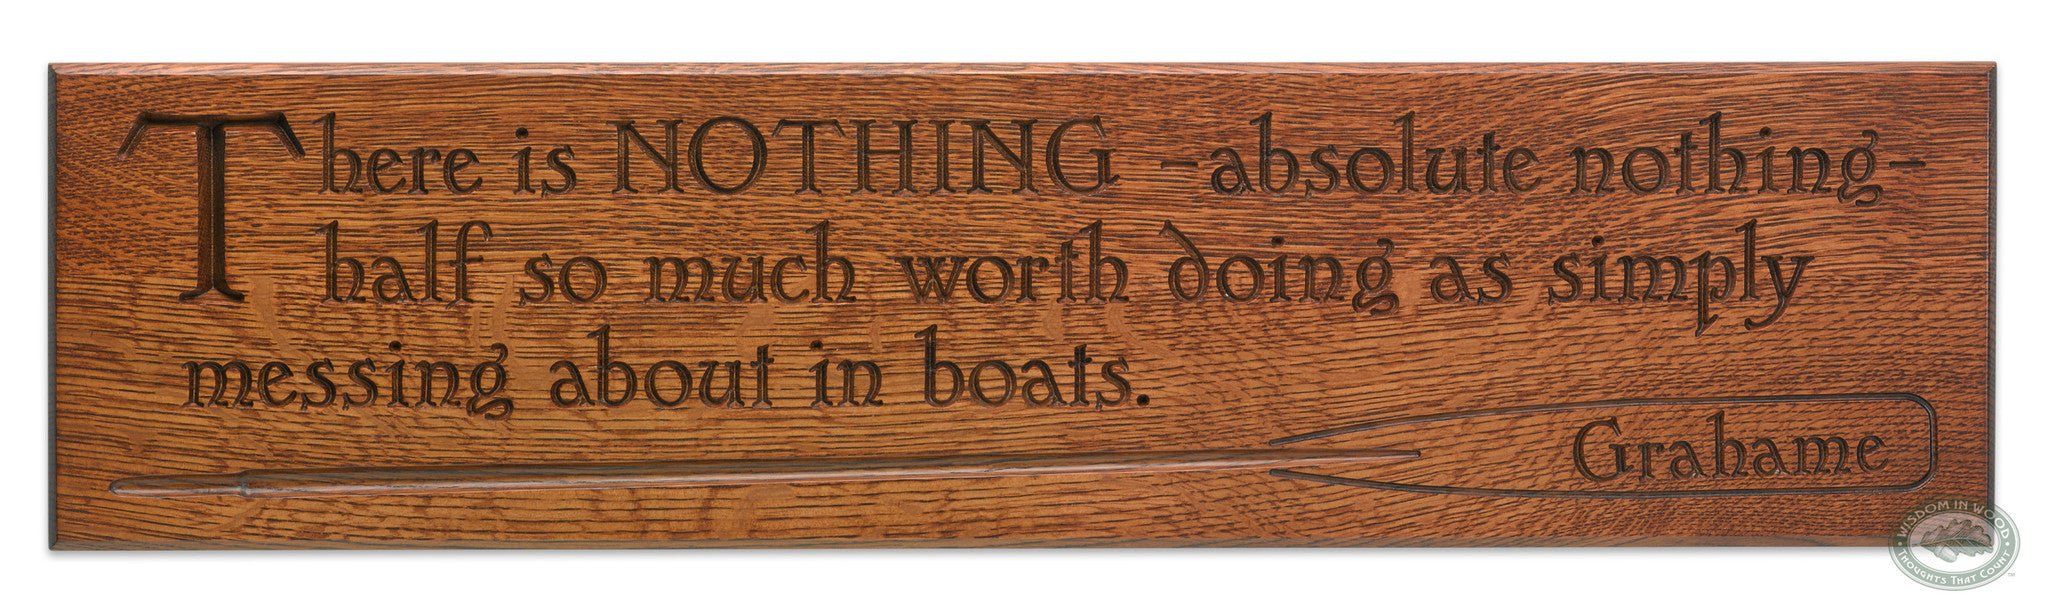 Kenneth Grahame Quote, Wind in the Willows - Messing About in Boats ...